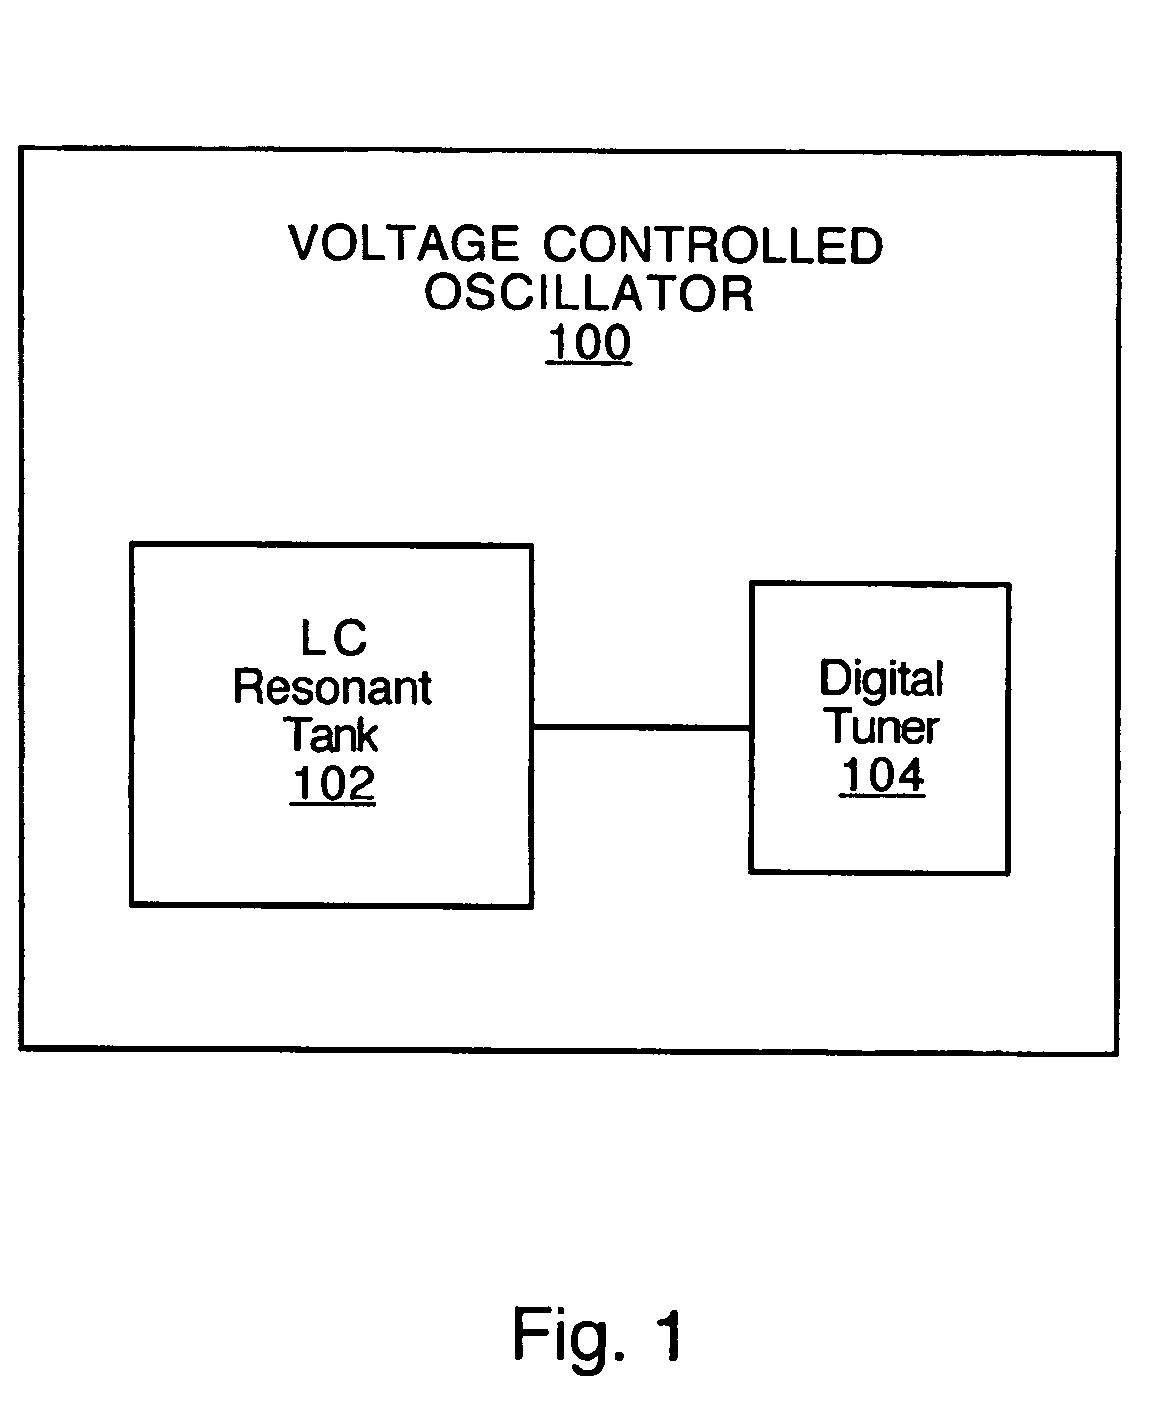 Coarse frequency tuning in a voltage controlled oscillator